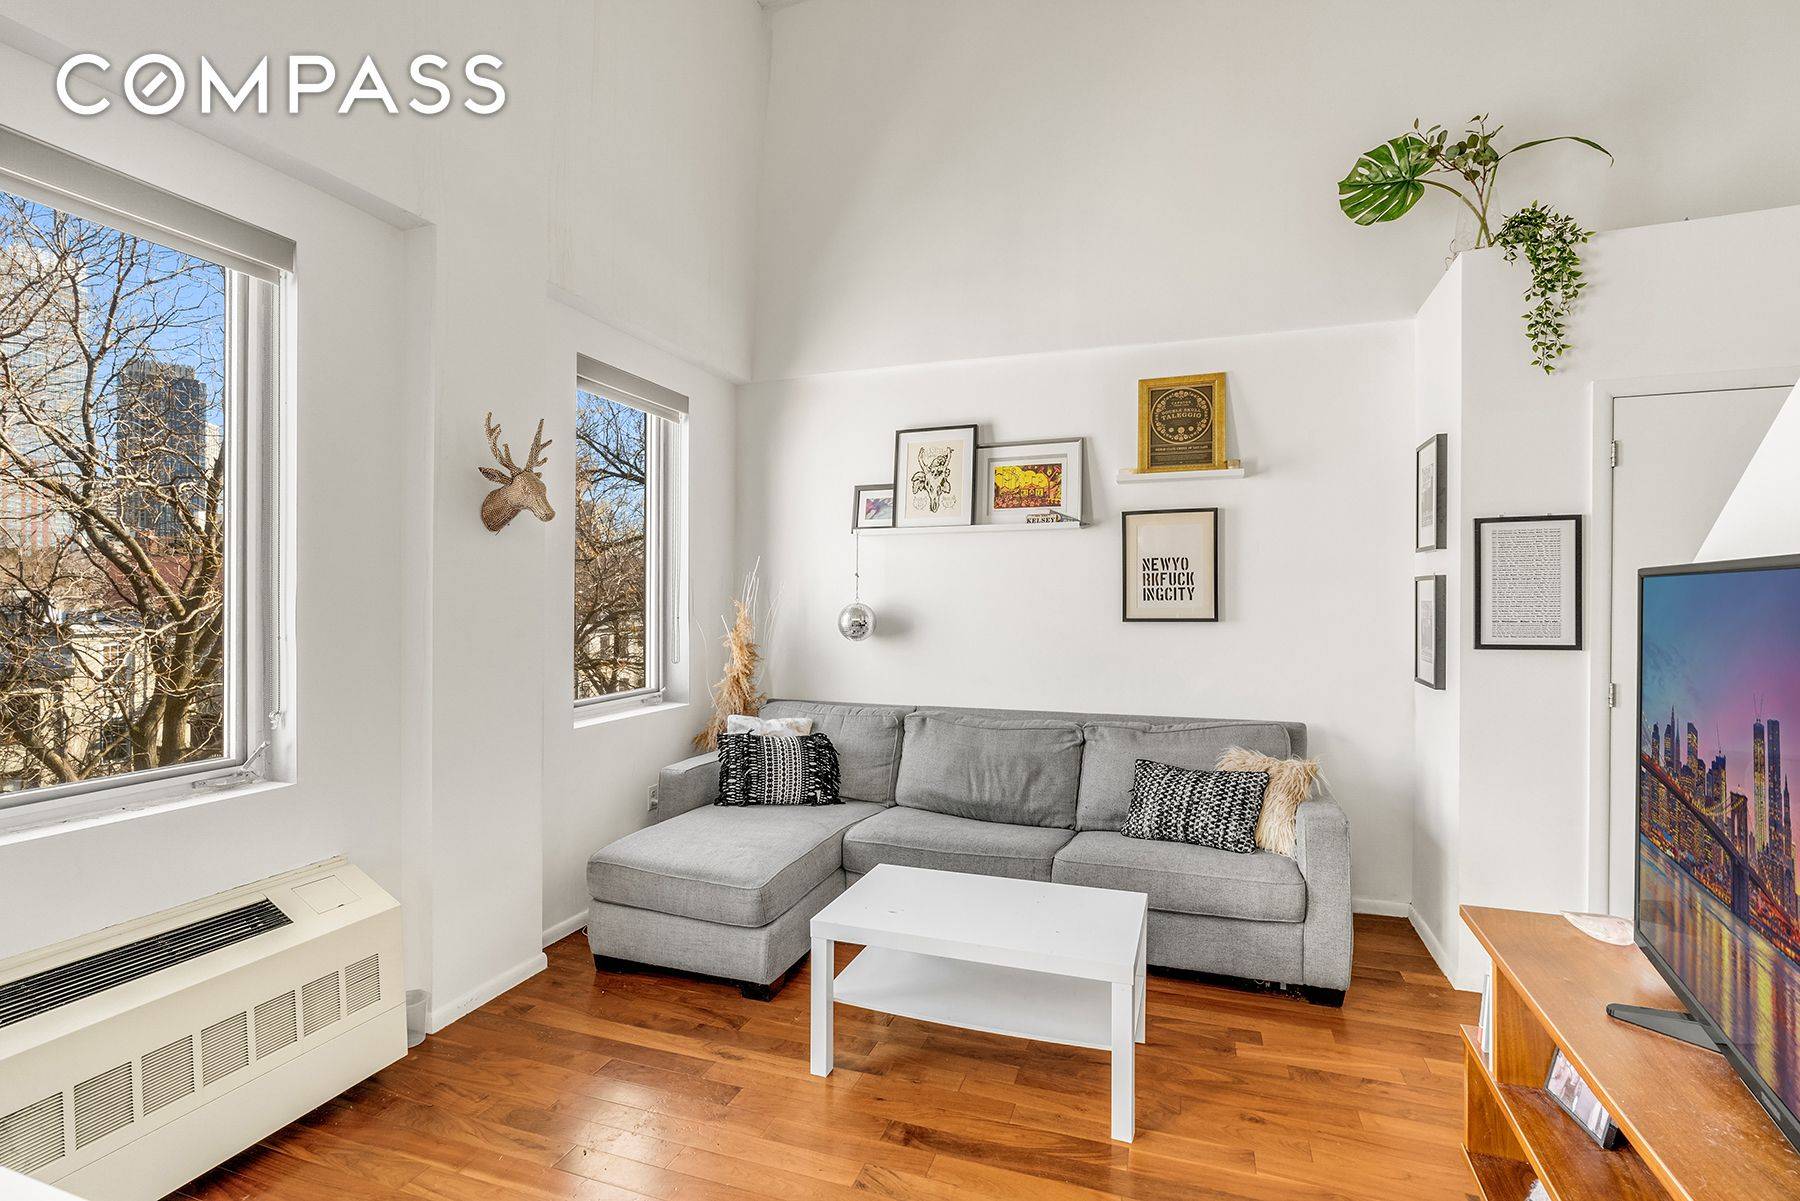 Welcome home to this stunning penthouse duplex loft in the red hot heart of Brooklyn's Boerum Hill.